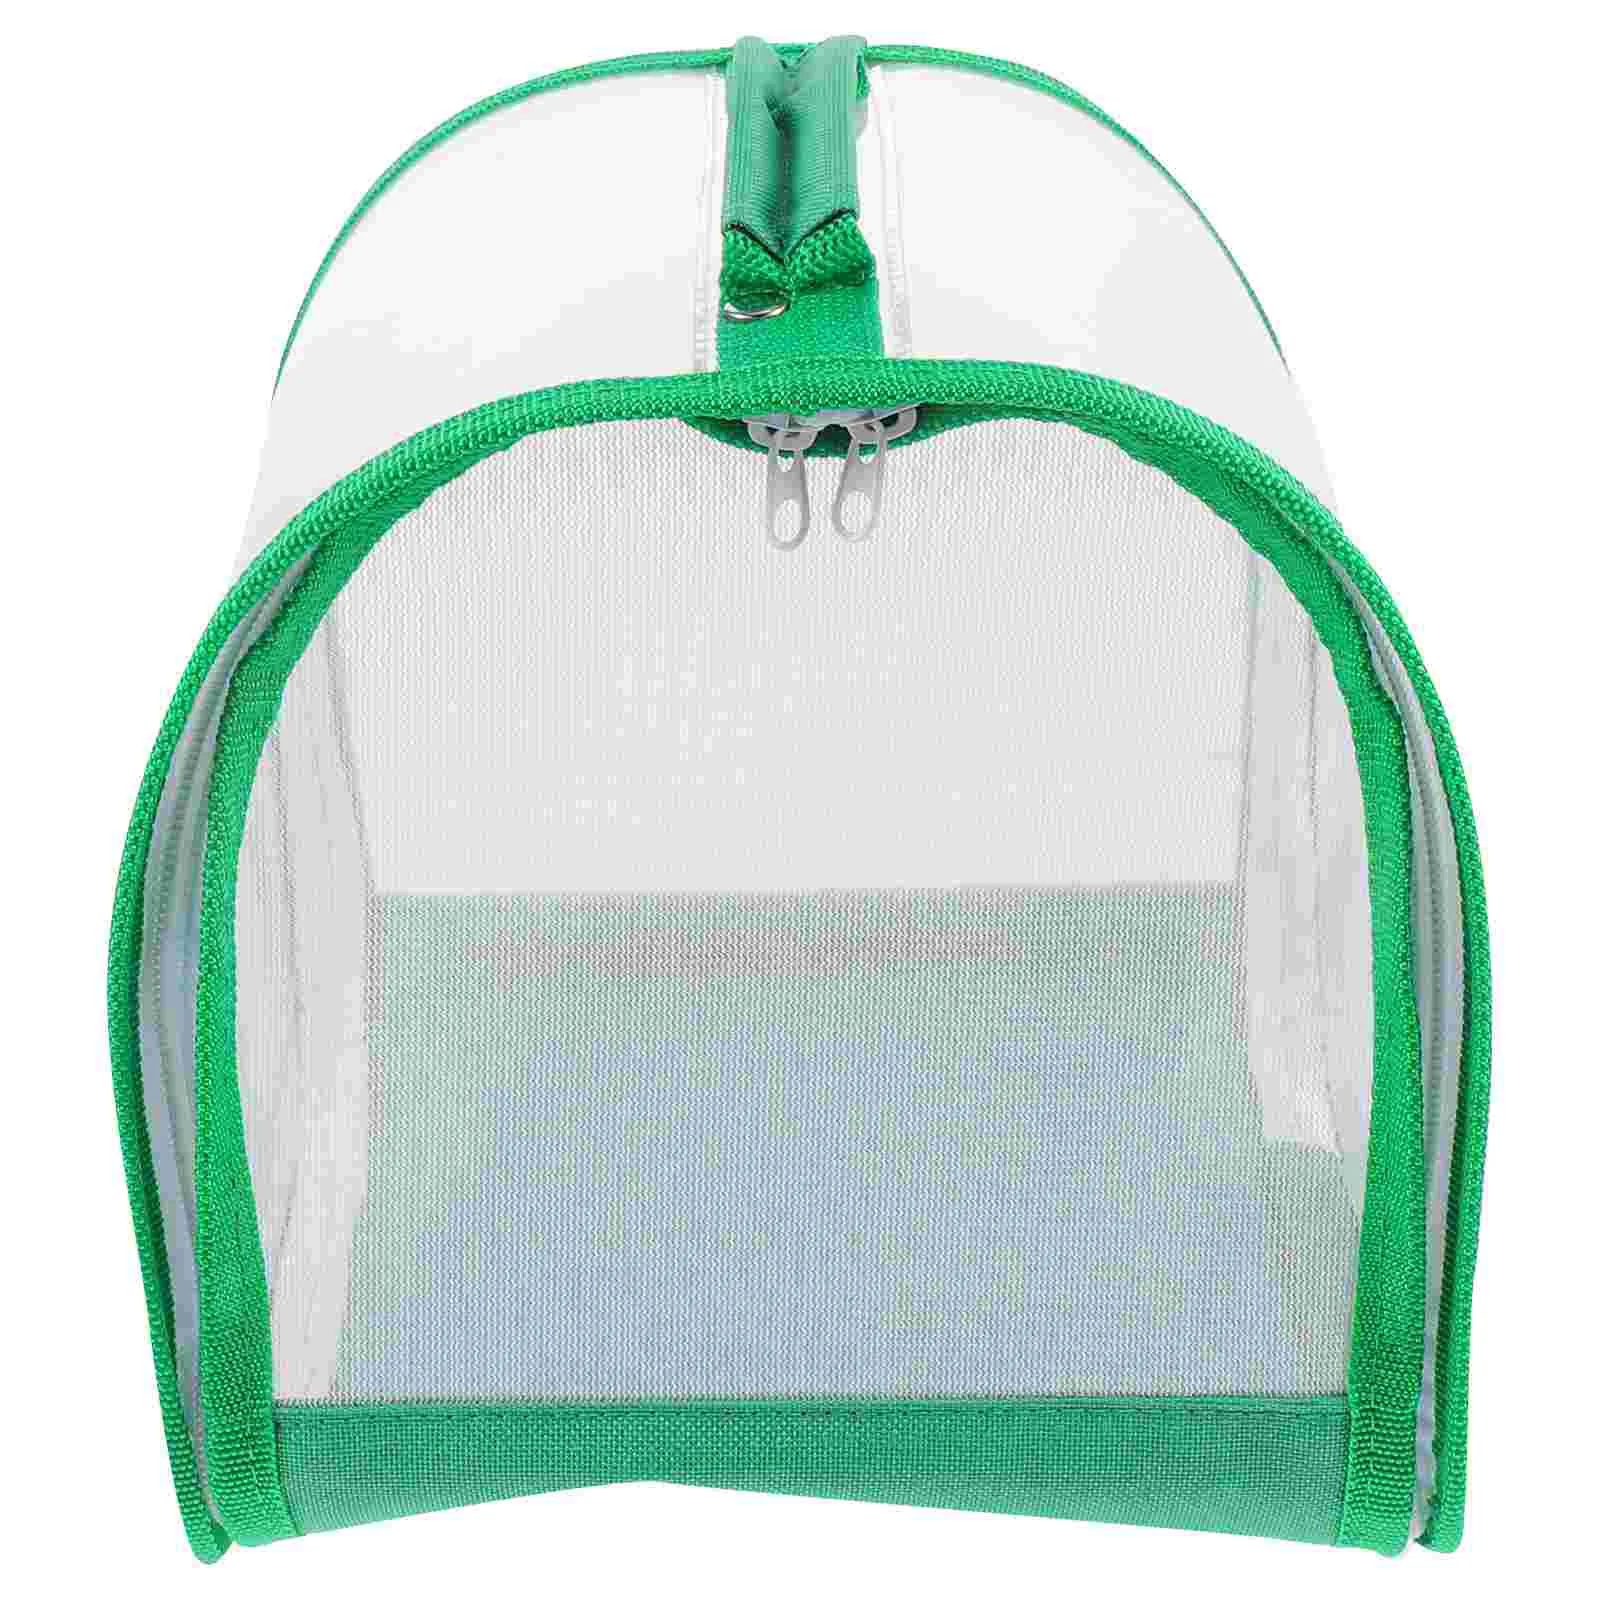 

Insect Box Habitat Bug Catcher Kit Exploration Mesh Collection Net Toy Terrarium Kids Cage Collapsible Observation Viewer Tool